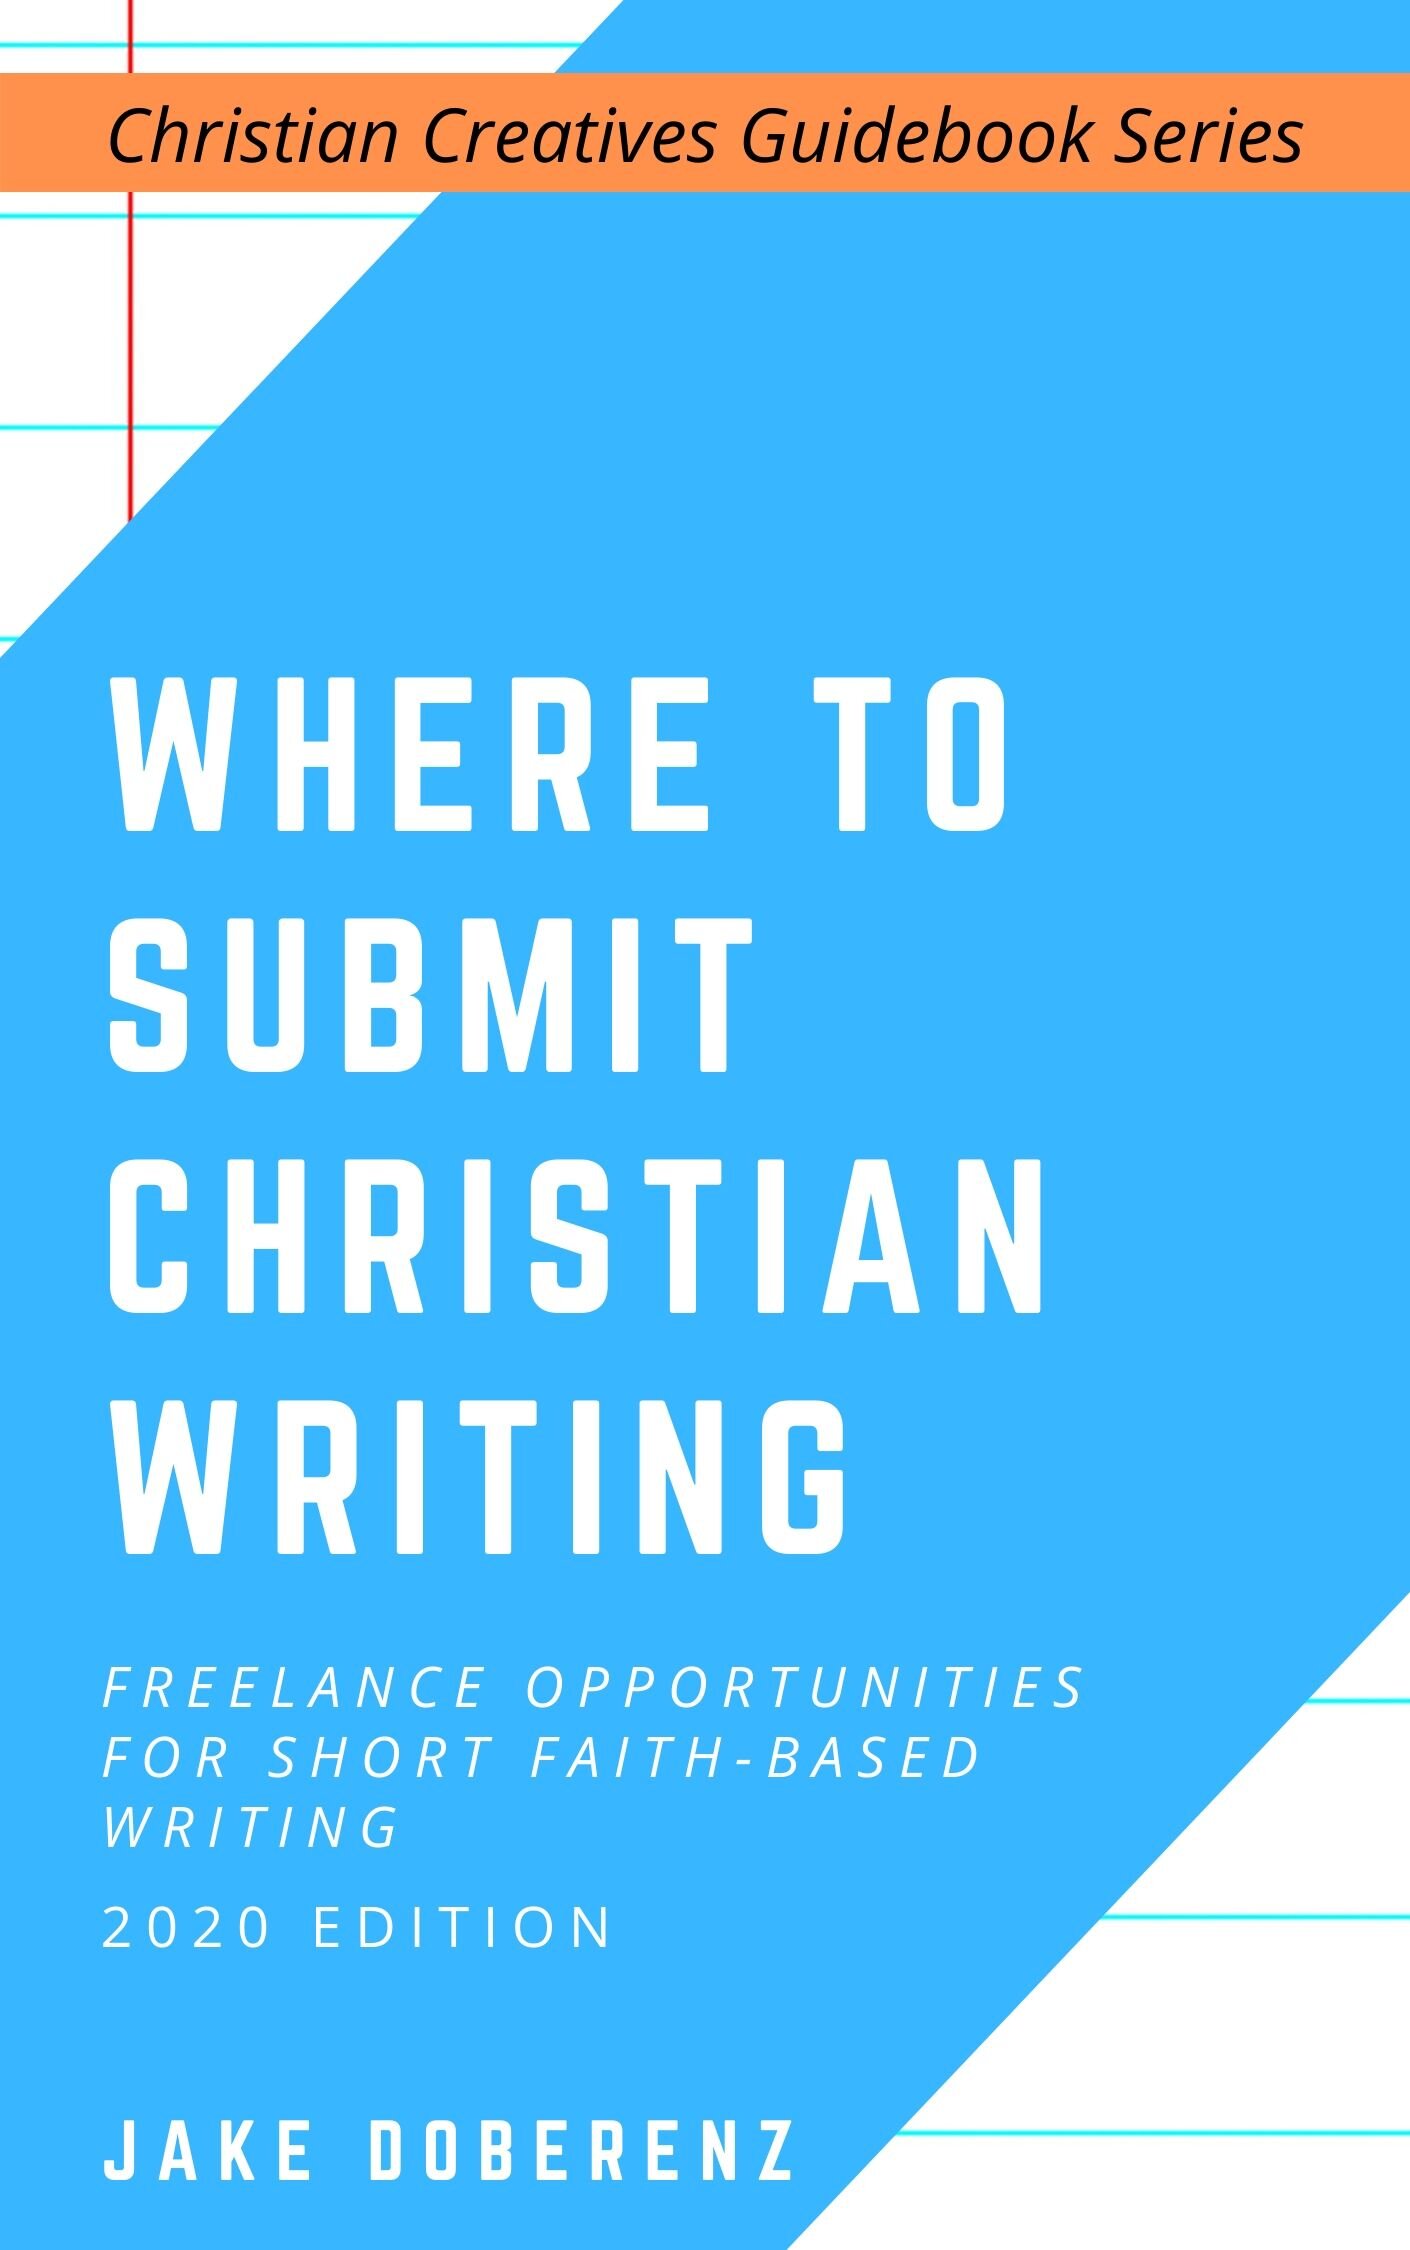 Where to Submit Your Christian Writing - By Jake Doberenz